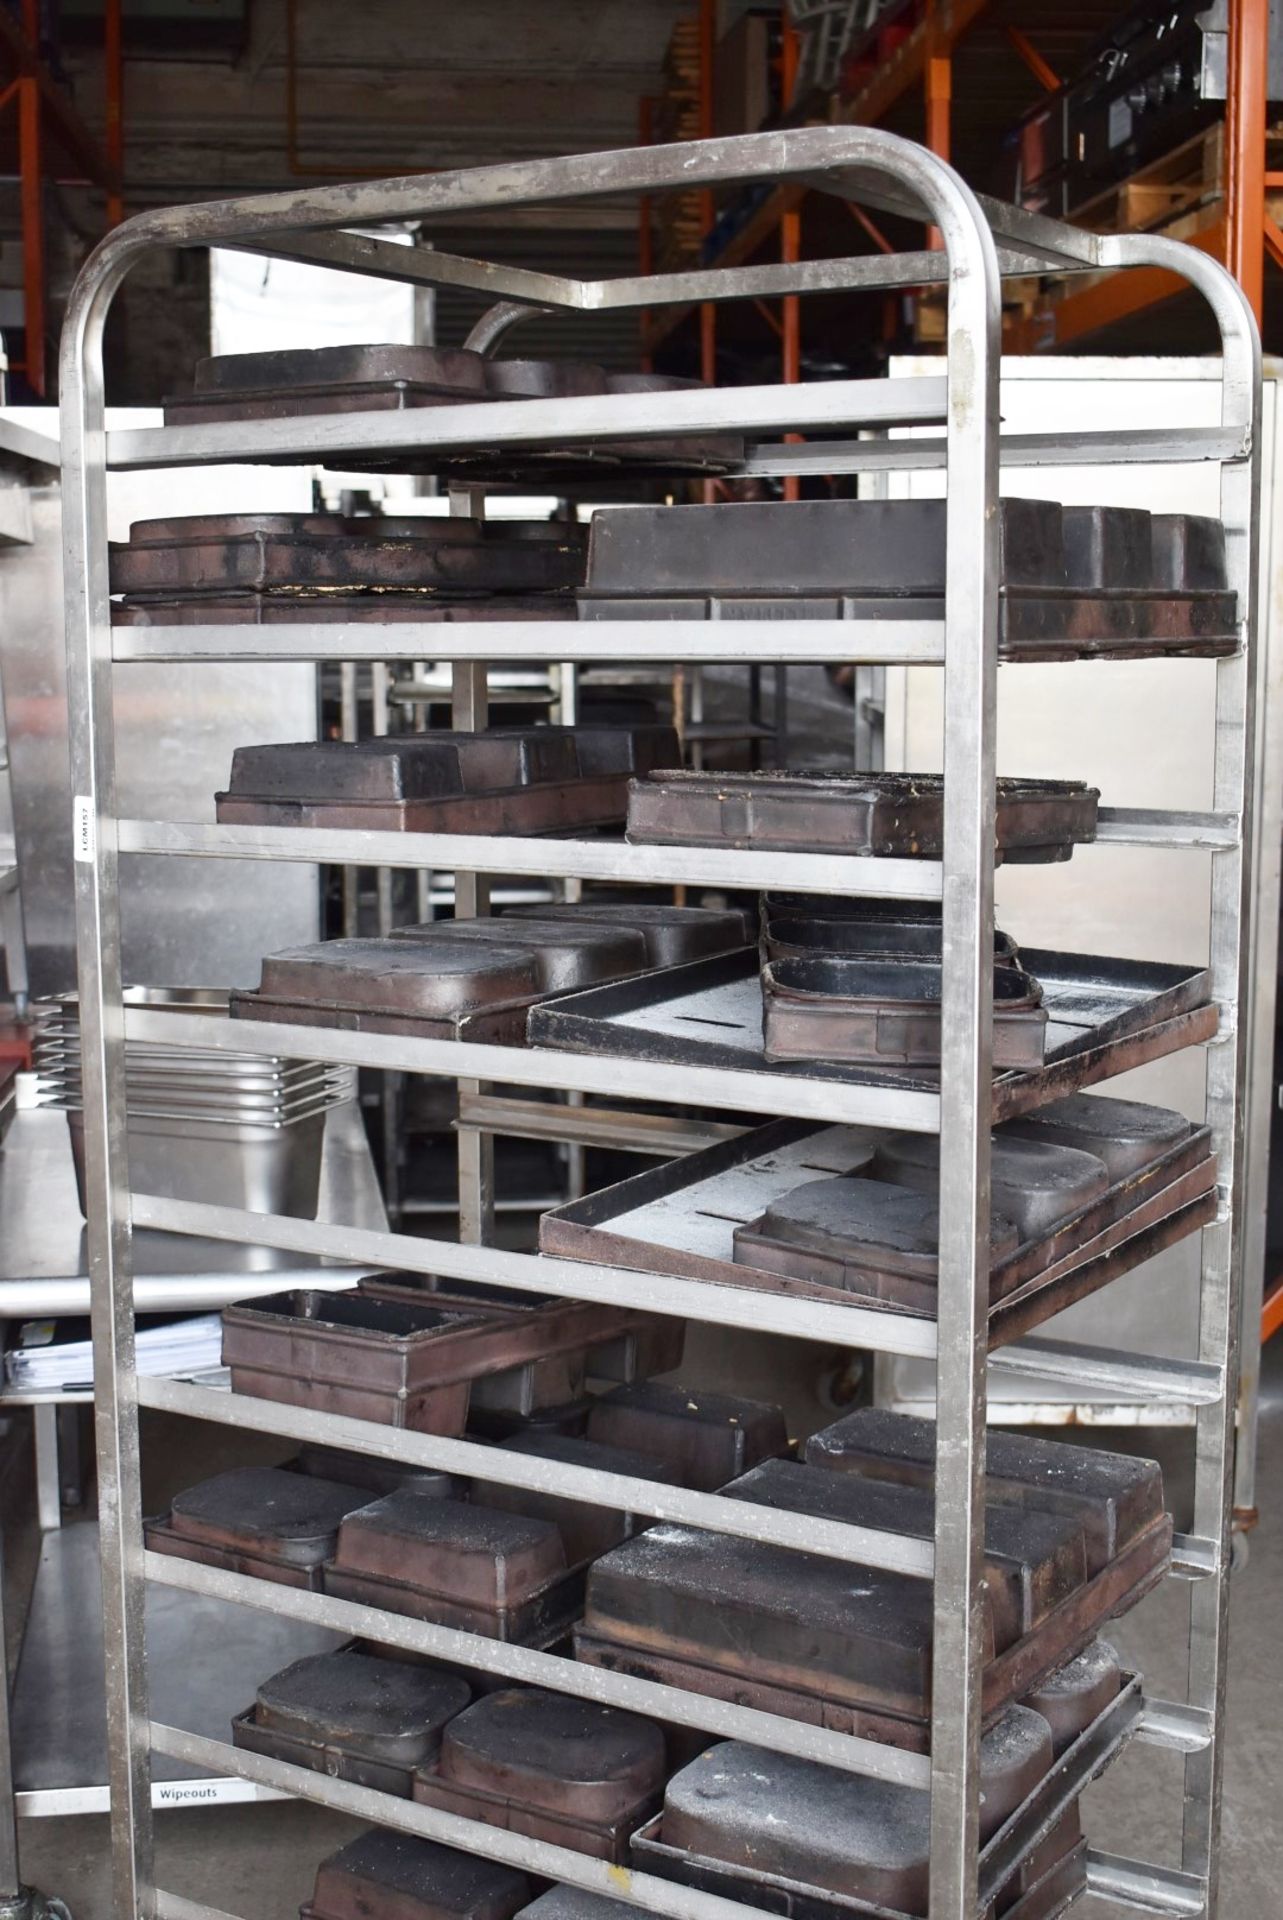 1 x Bakers 11 Tier Mobile Tray Rack With Various Bread Baking Trays - Stainless Steel With Castors - - Image 3 of 8